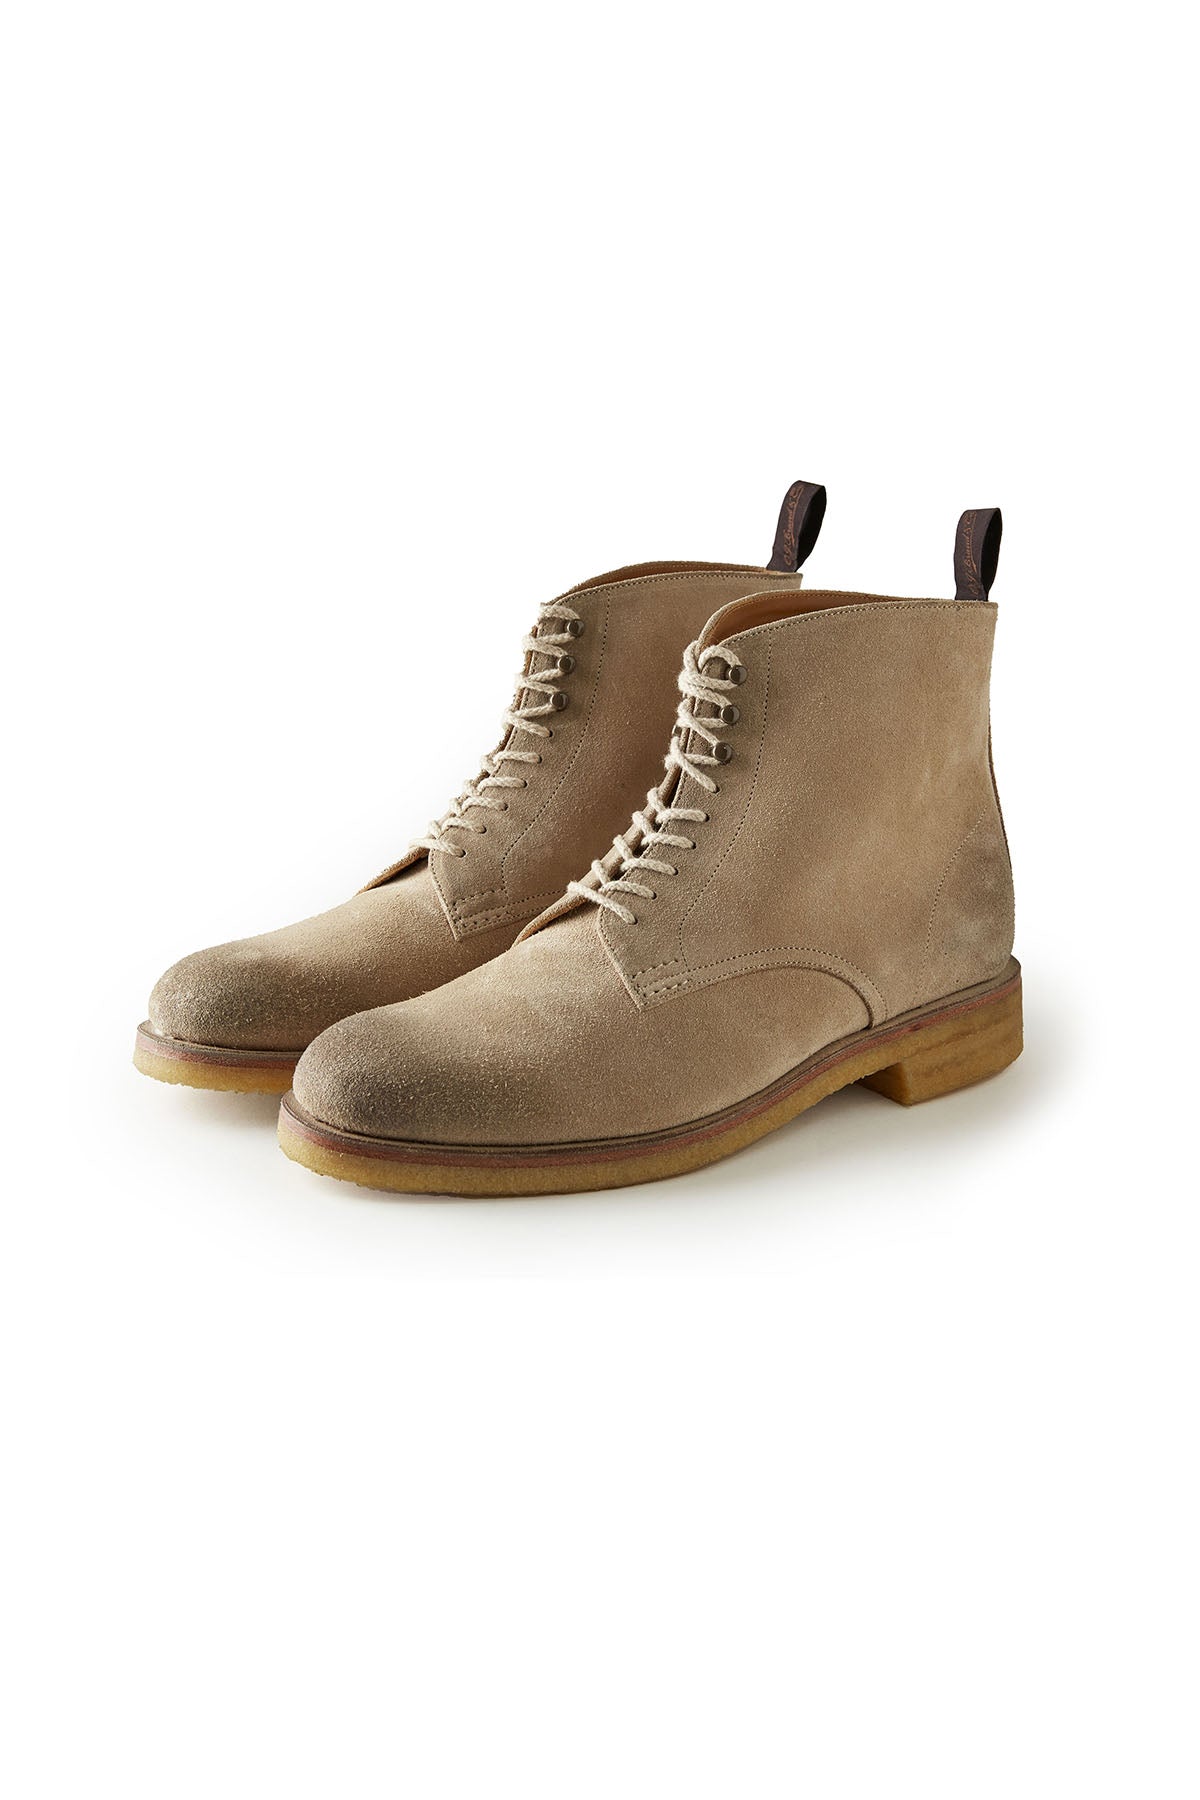 "The Hunter"  STUNNING LEATHER UNKLE BOOTS - 231OJ-FW03